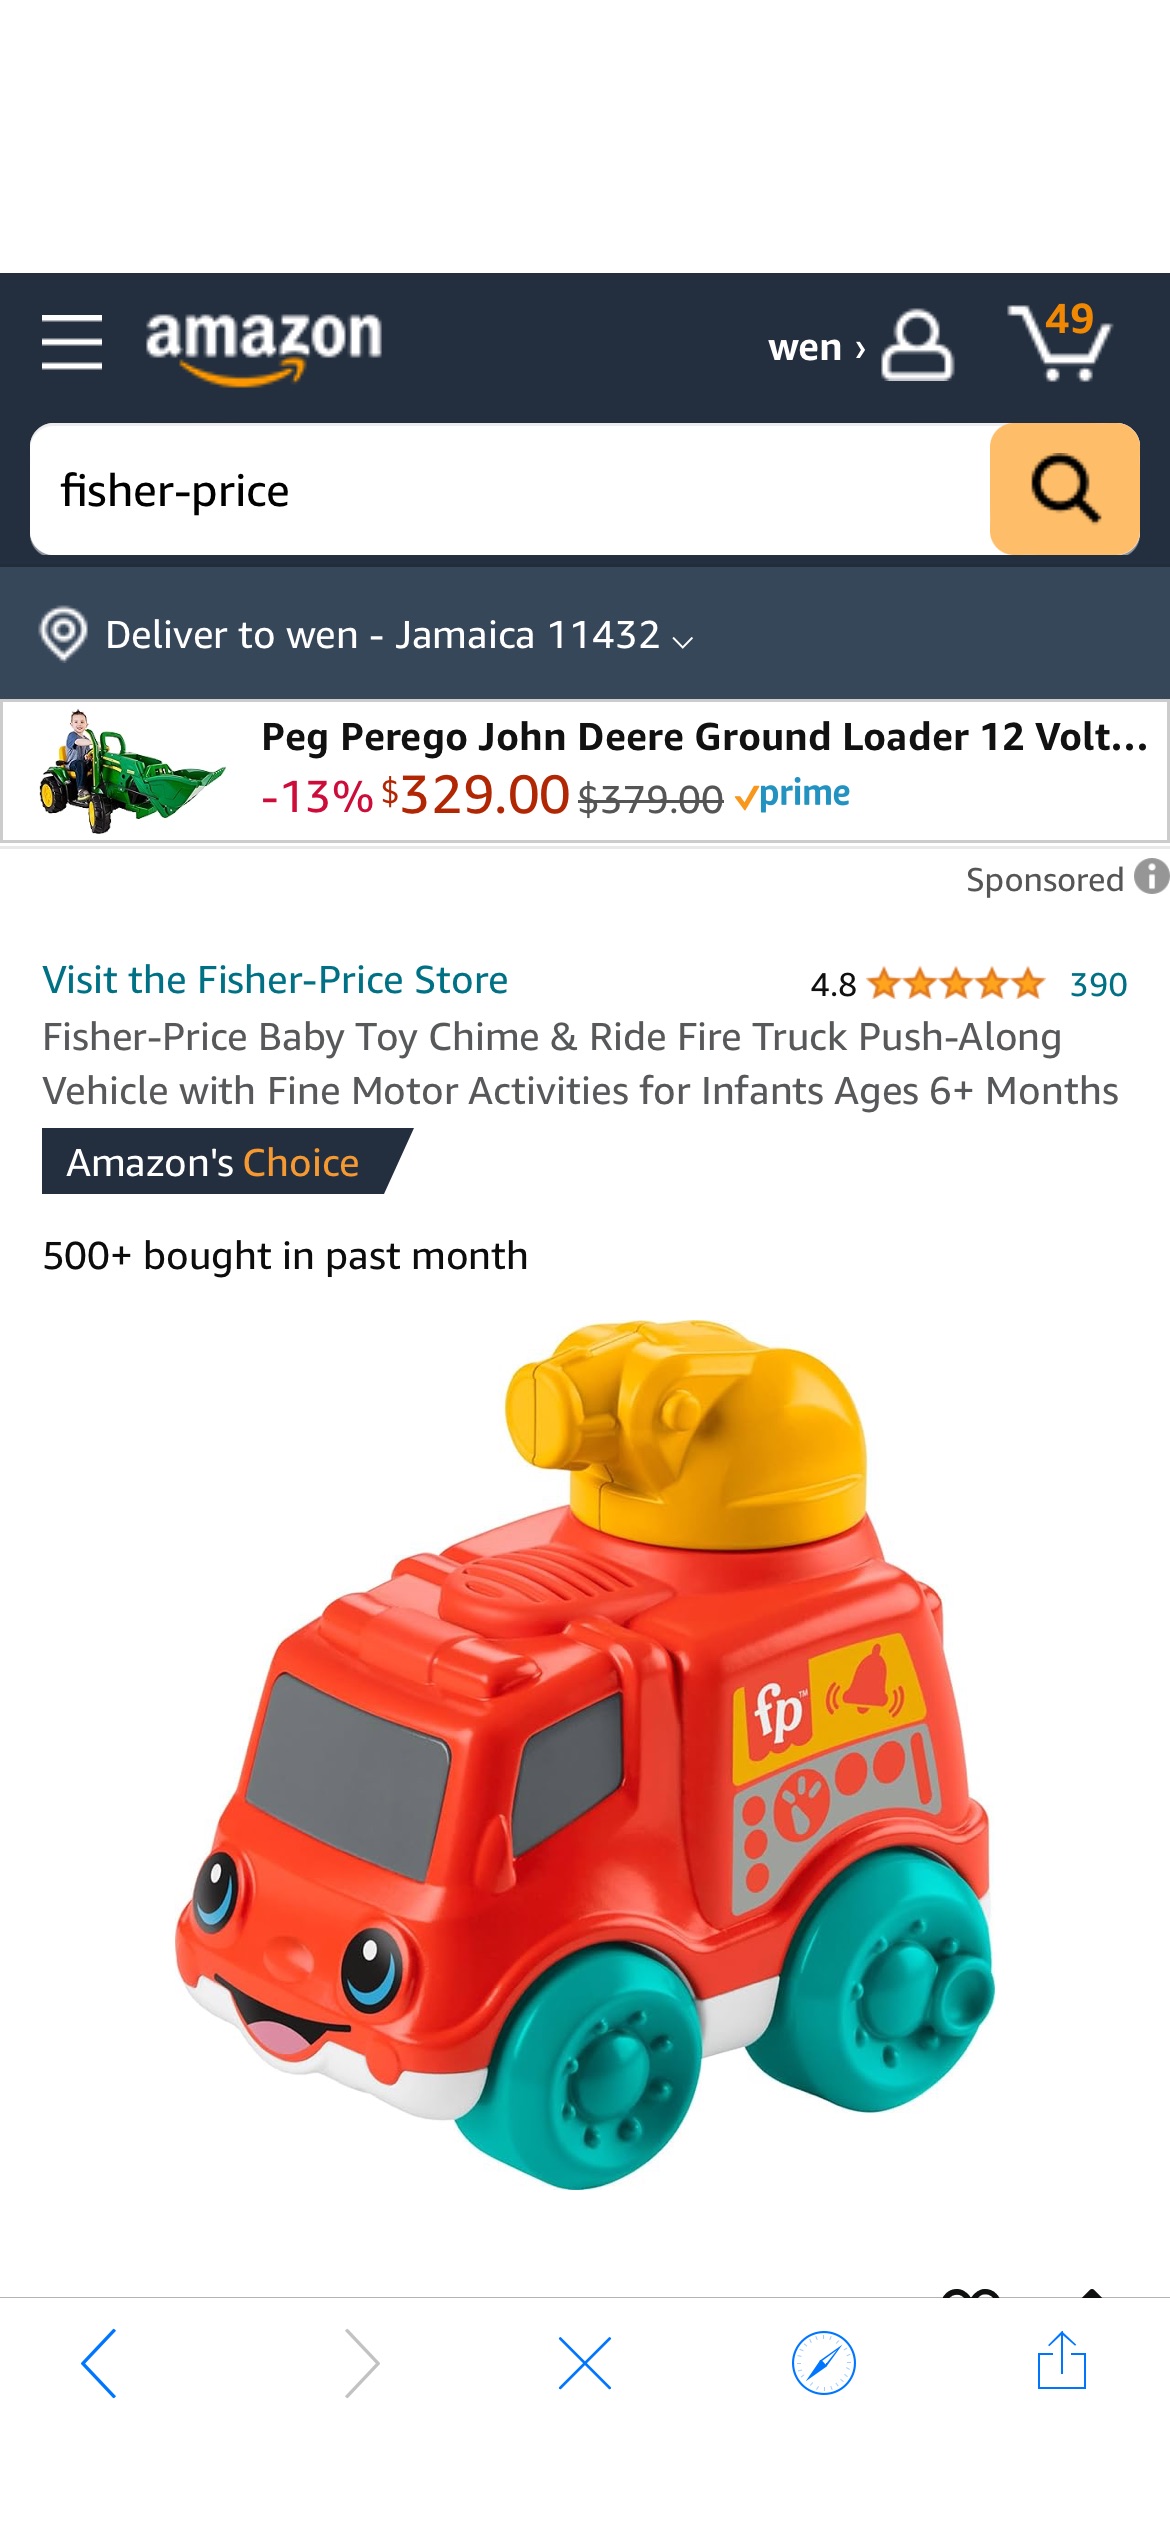 Amazon.com: Fisher-Price Baby Toy Chime & Ride Fire Truck Push-Along Vehicle with Fine Motor Activities for Infants Ages 6+ Months : Toys & Games